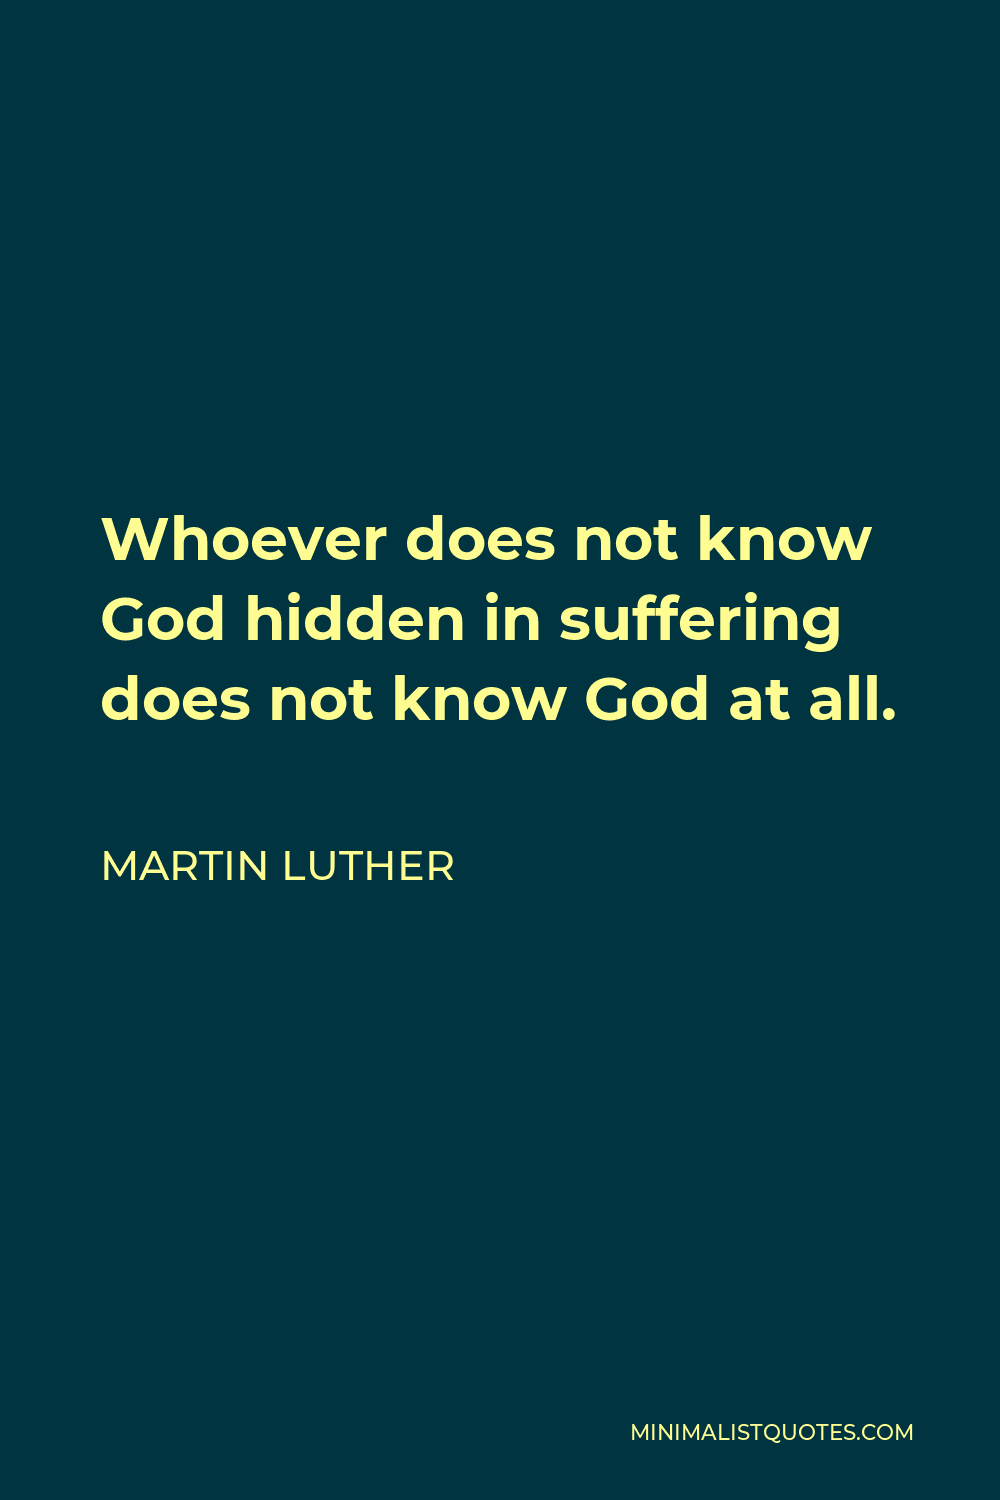 Martin Luther Quote - Whoever does not know God hidden in suffering does not know God at all.